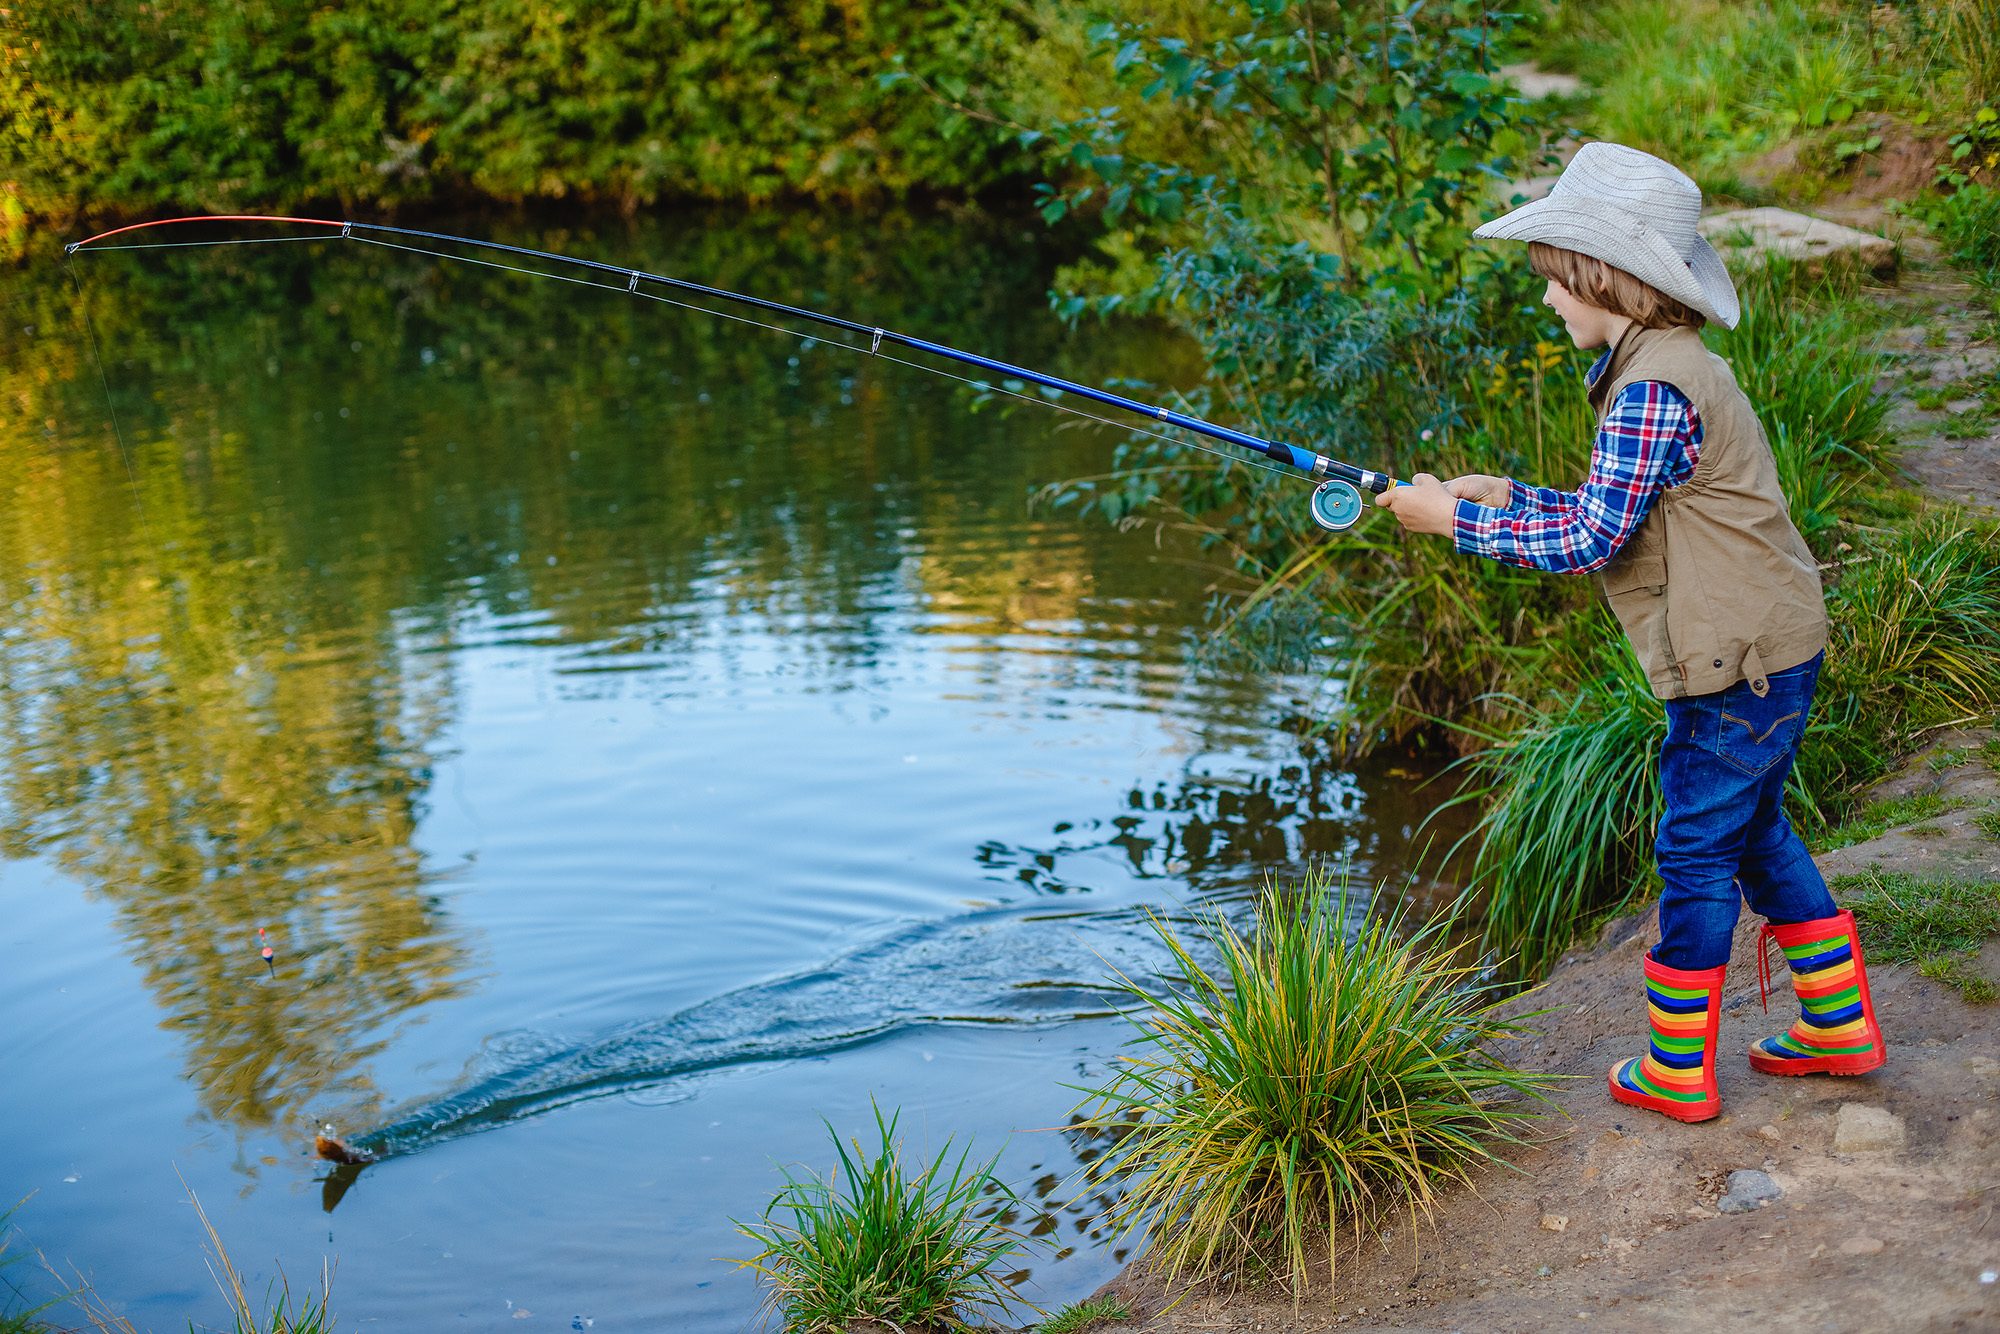 Young boy standing next to a pond. He is holding a fishing pole, and he has cast the line into the water.